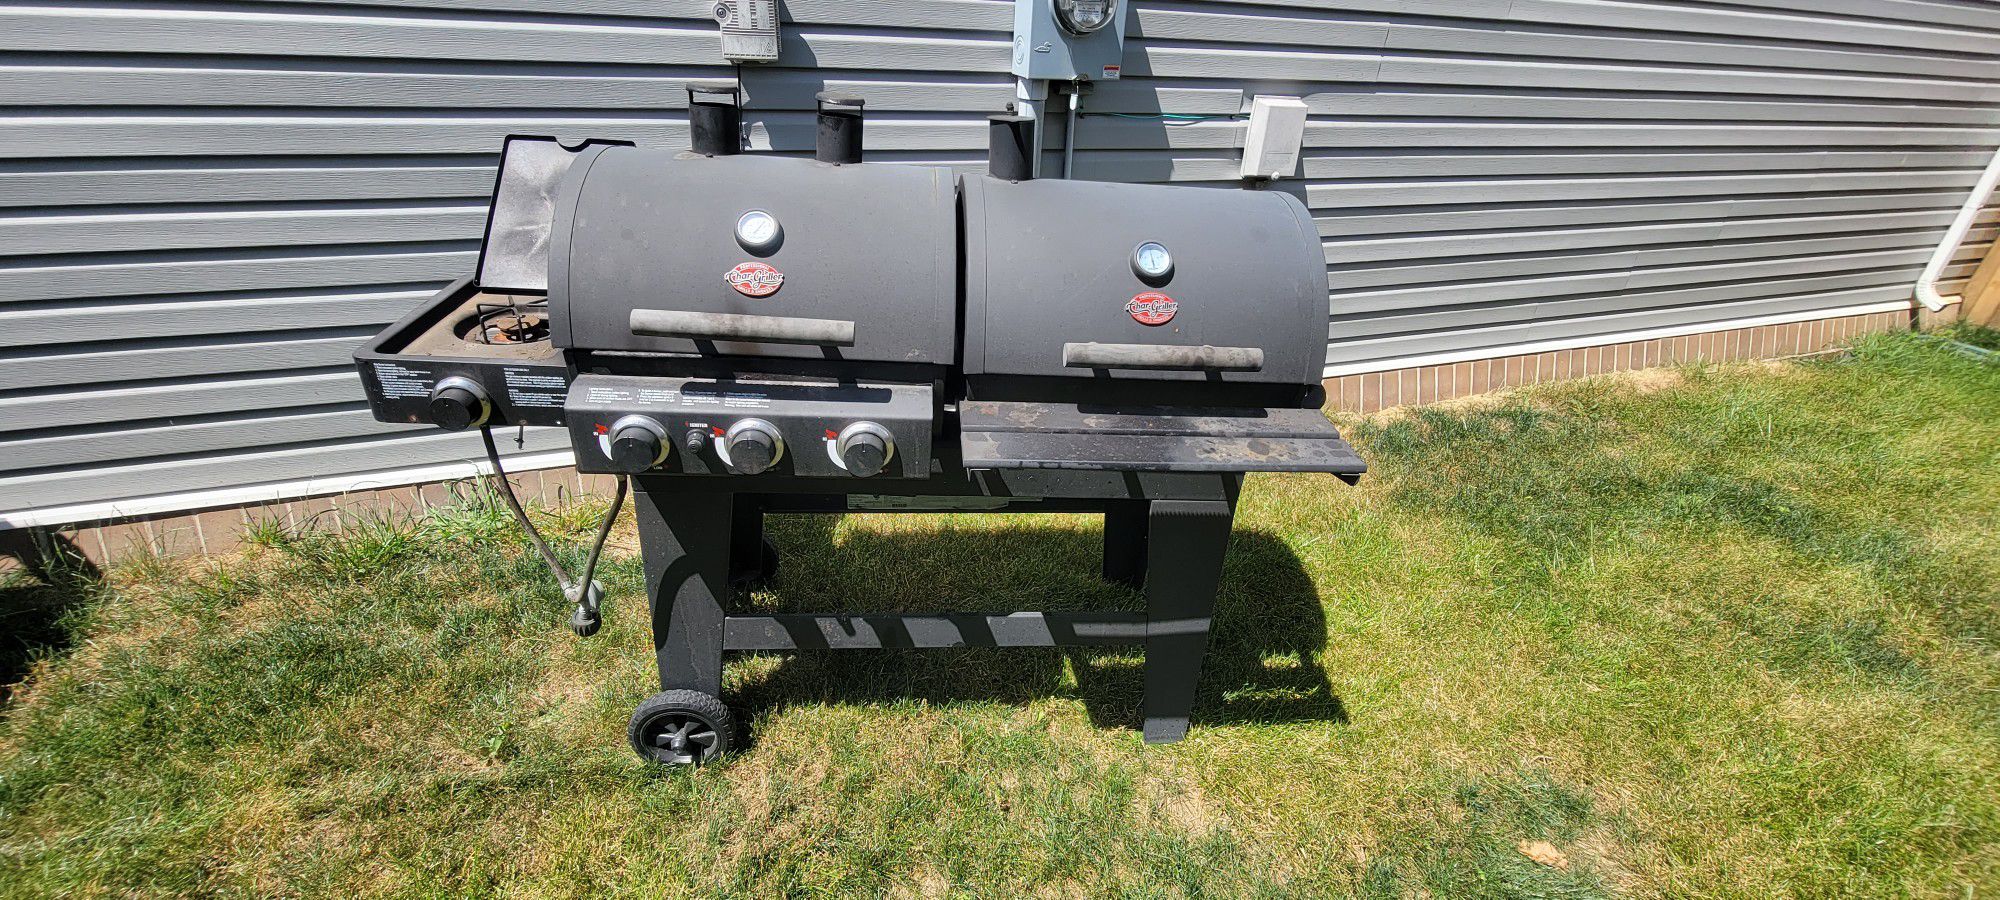 Char-Griller  Duo Black Dual-function Combo Grill

